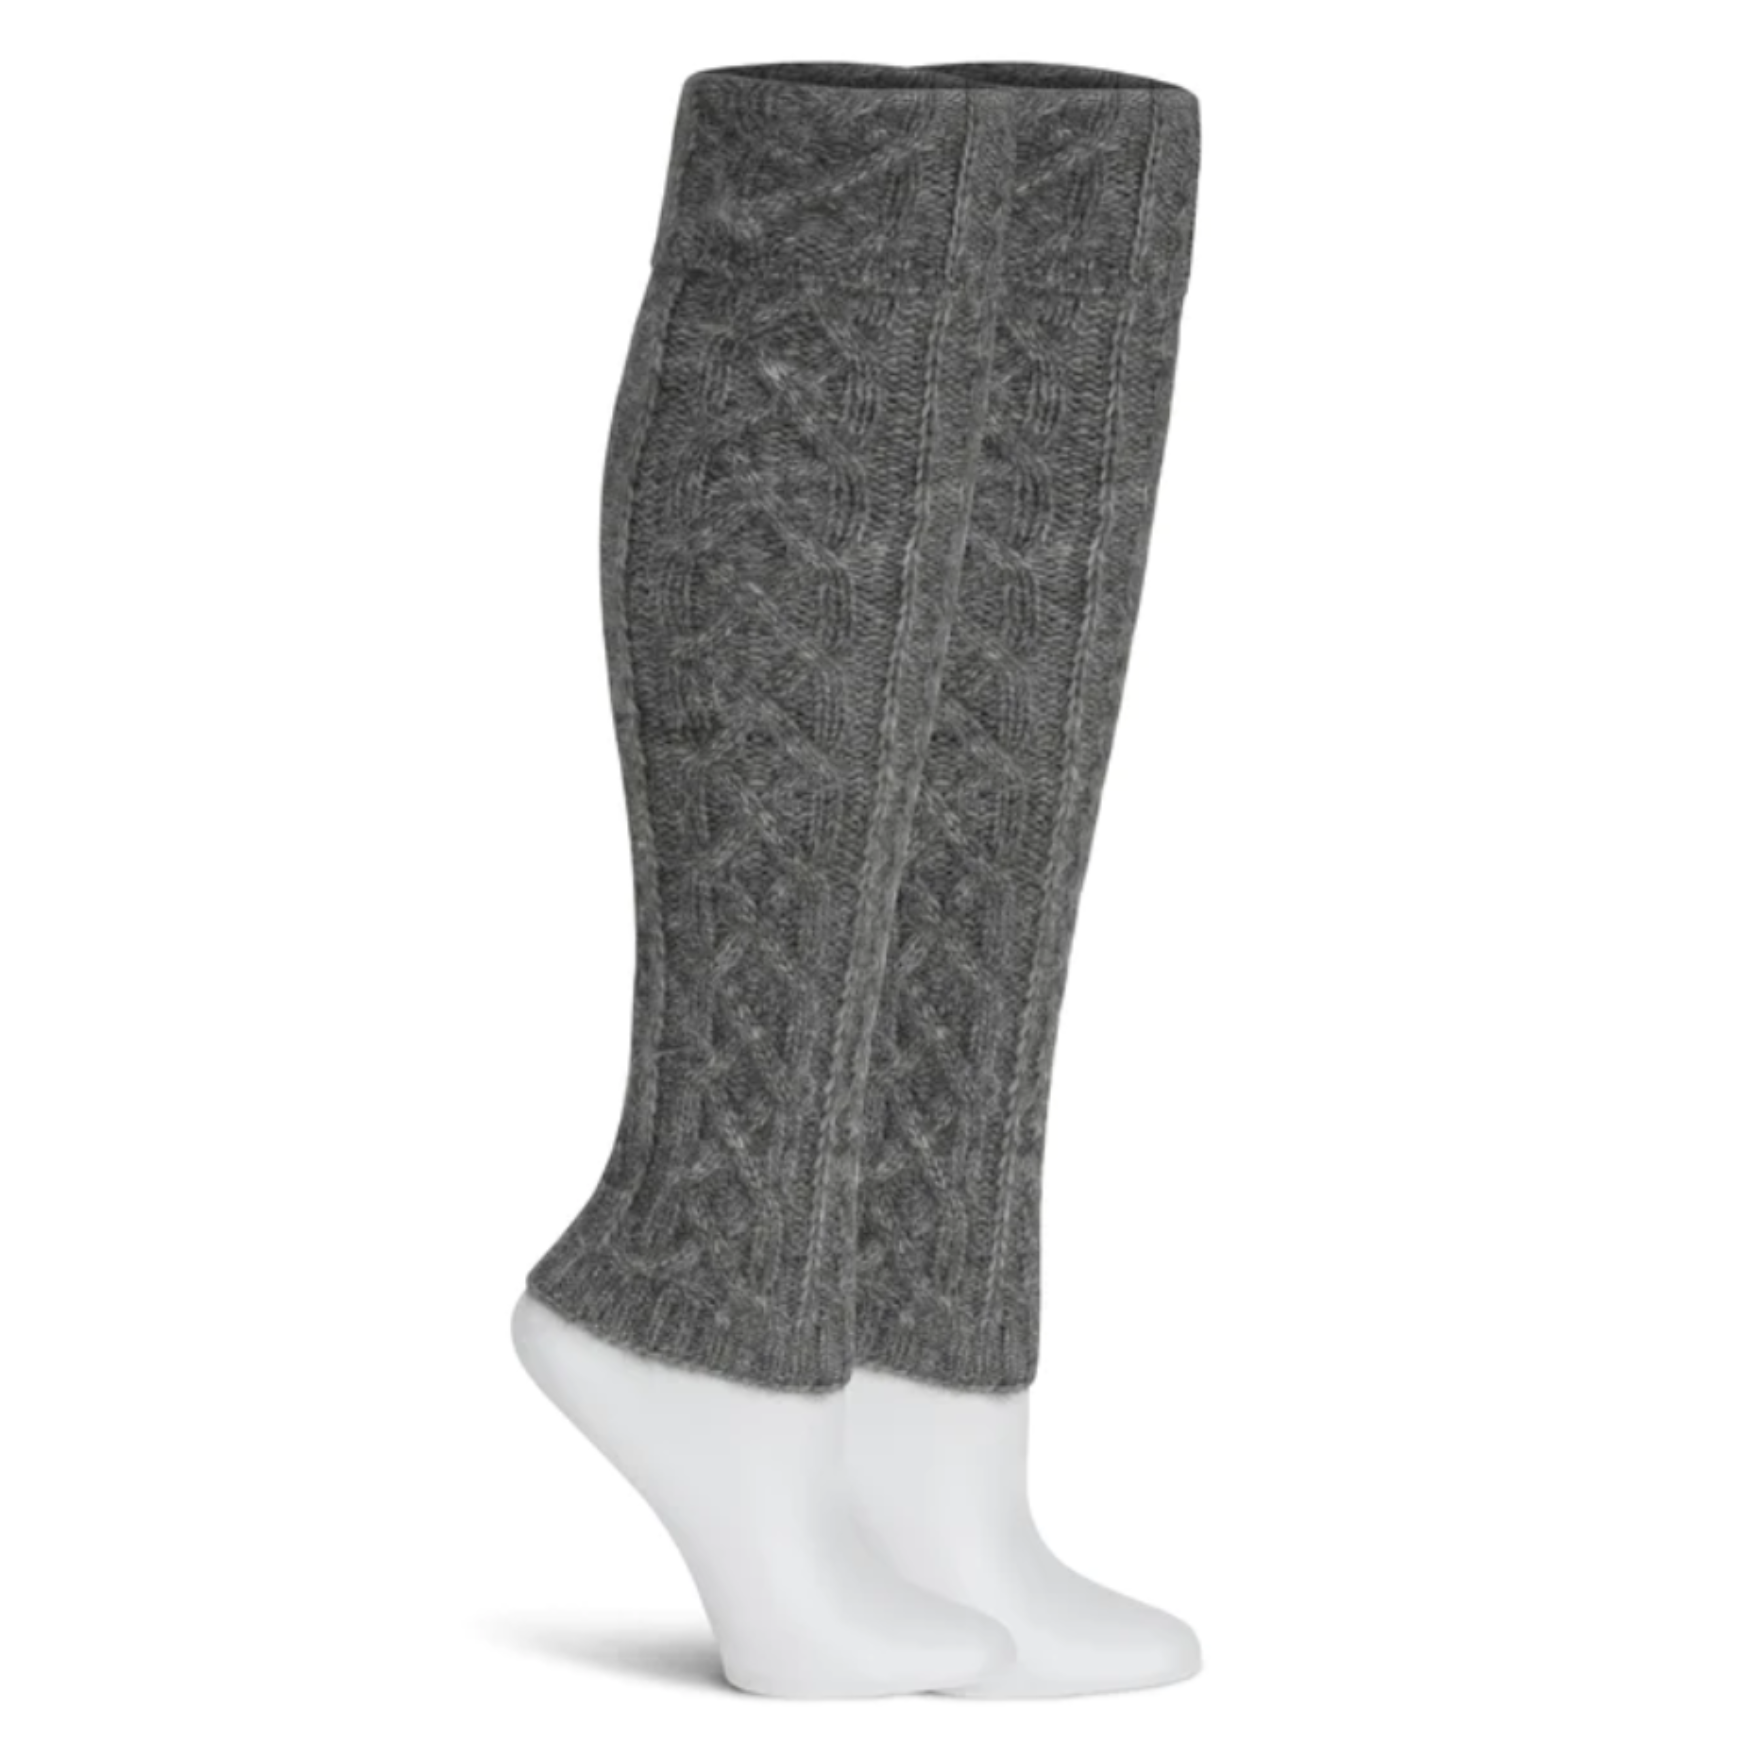 Girls Charcoal Cable Knit Tights